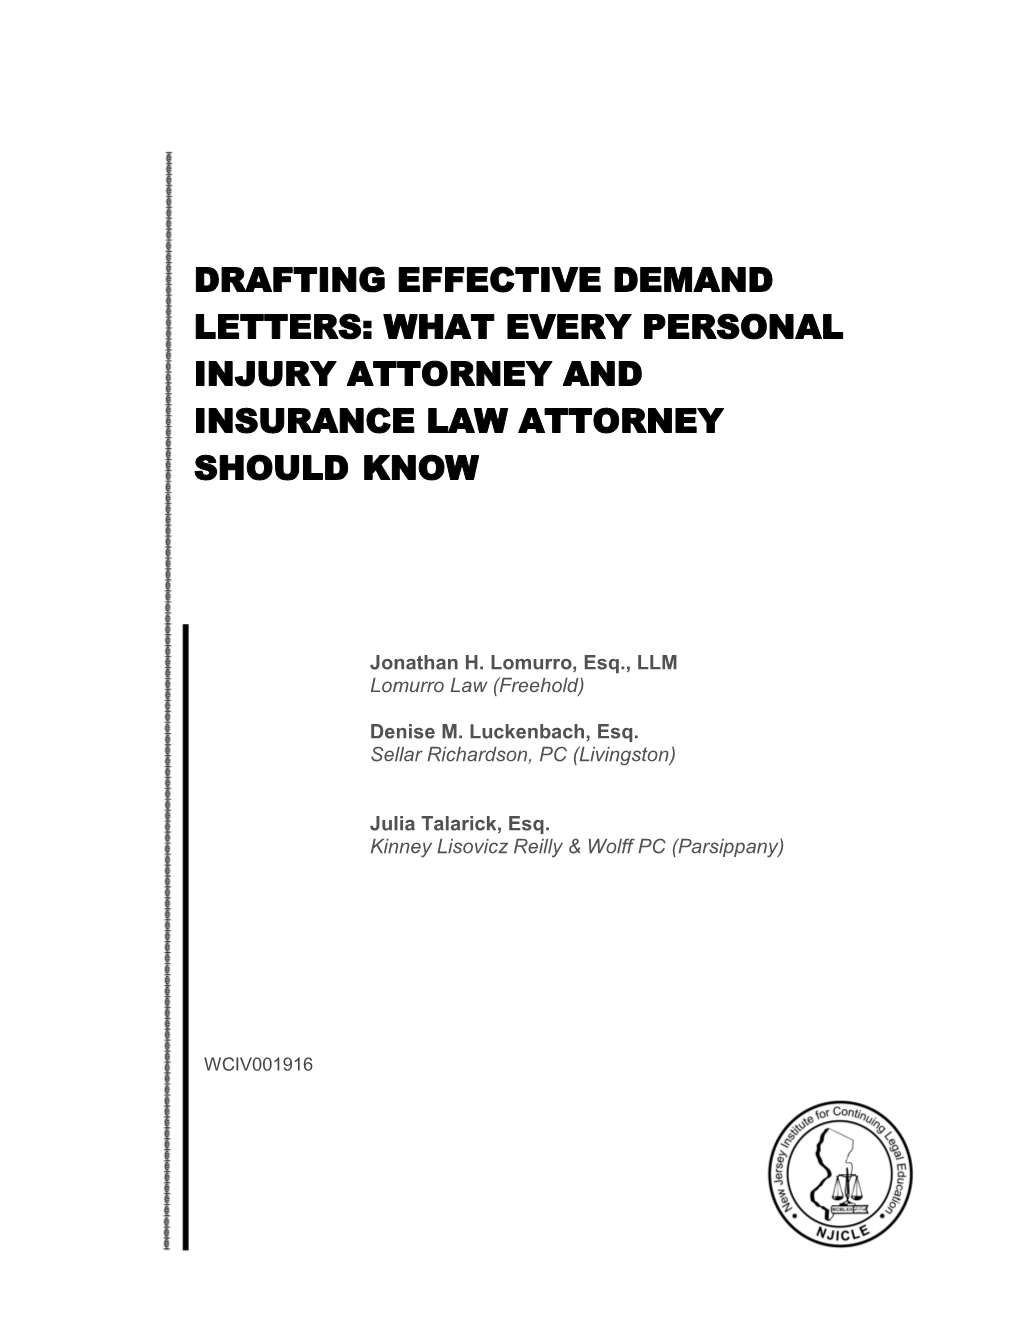 Drafting Effective Demand Letters: What Every Personal Injury Attorney And